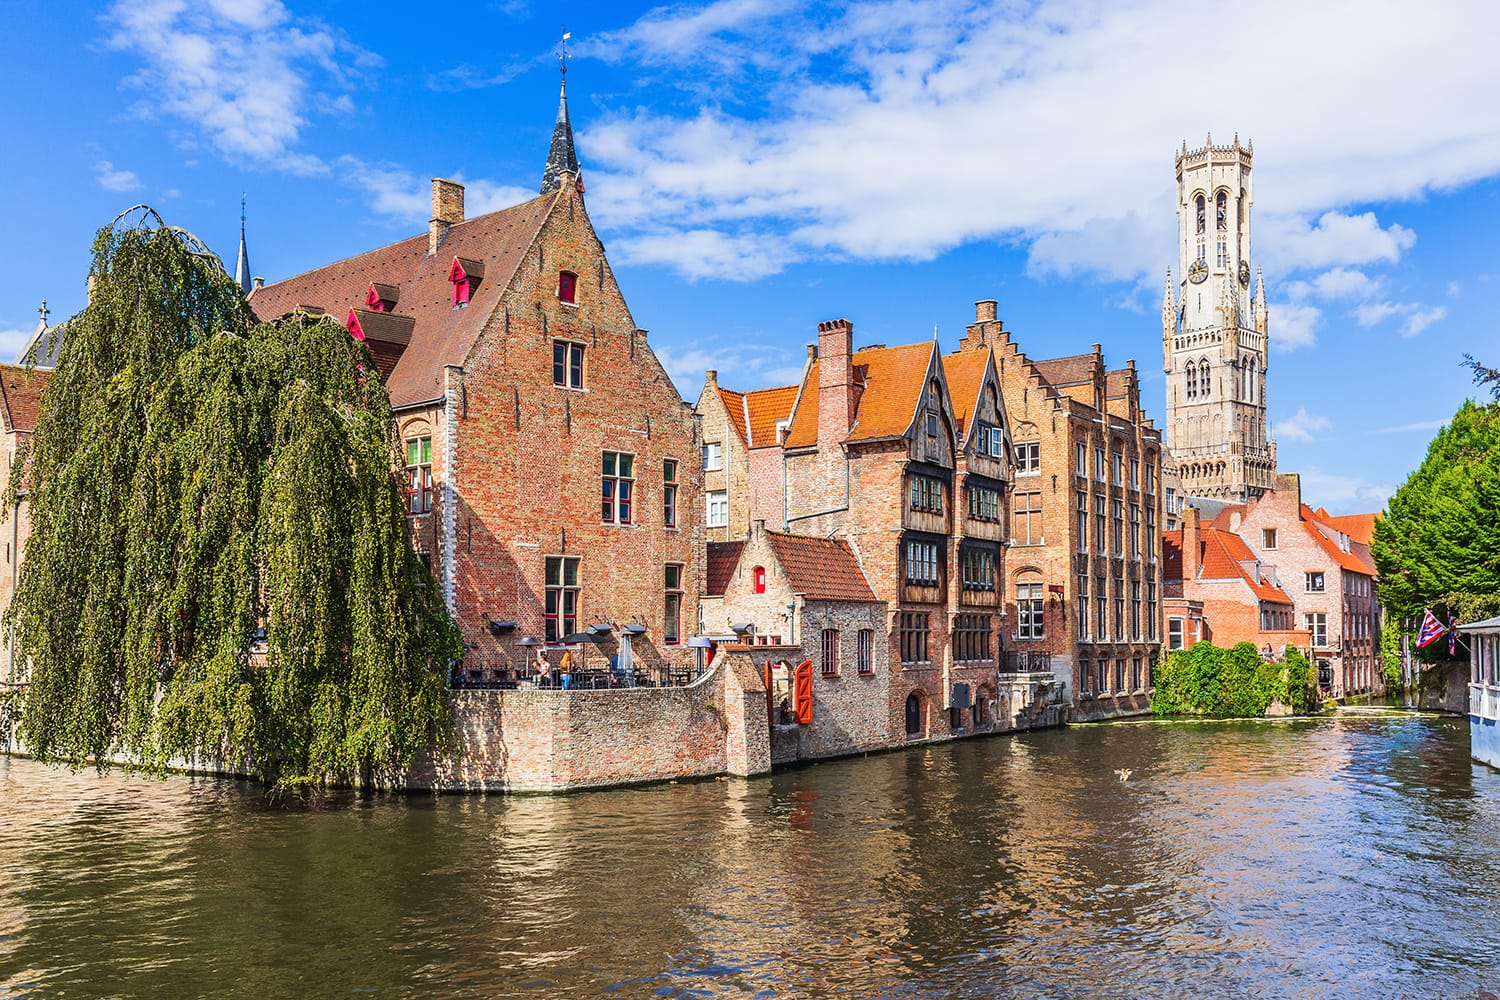 The Rozenhoedkaai canal in Bruges with the Belfry in the background.